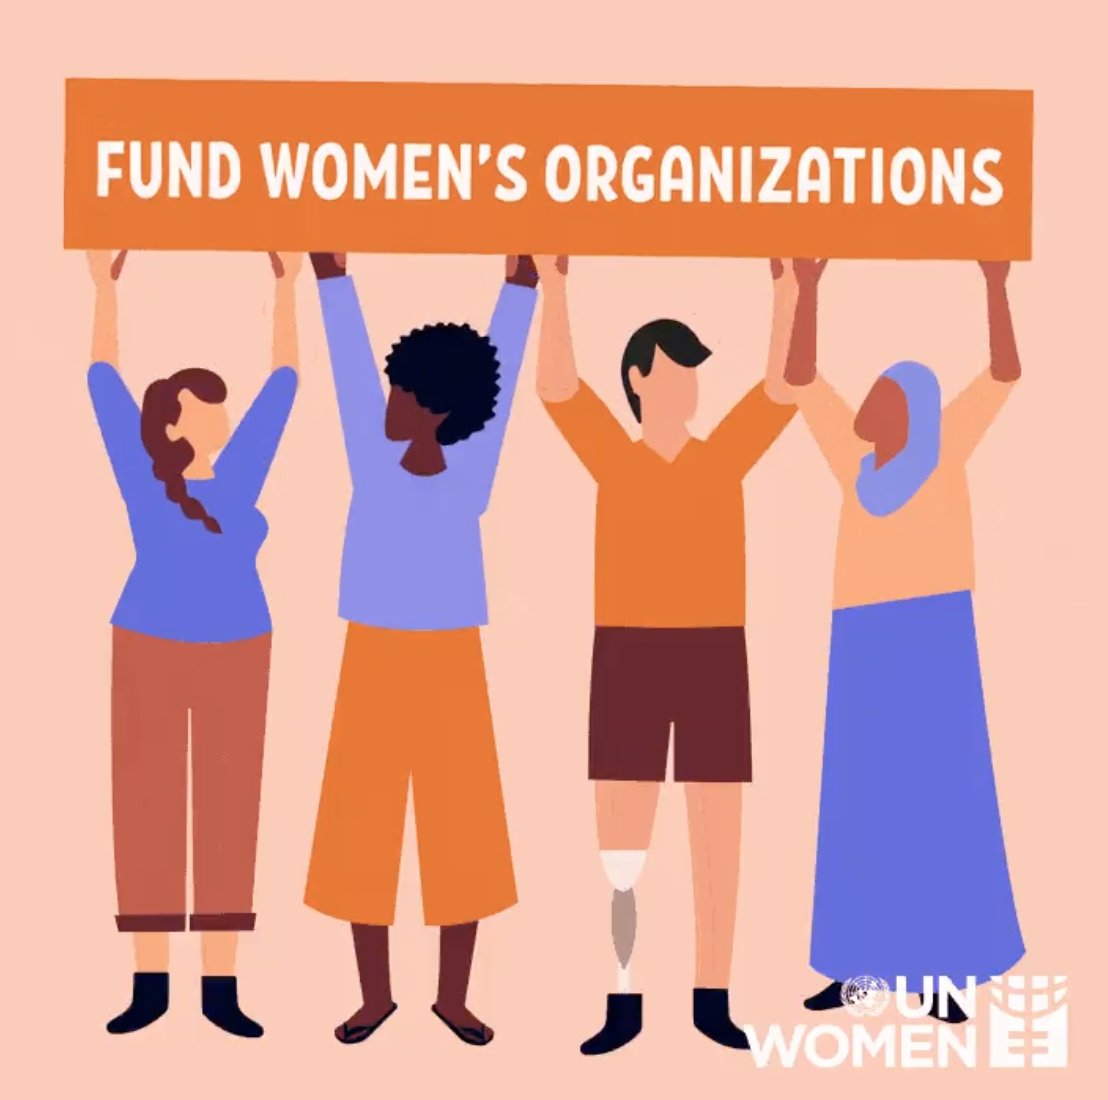 🙌 Supporting women's organizations plays a pivotal role in promoting #GenderEquality and women’s empowerment. They are our essential partners in this journey! 🤝

#PartnersForChange